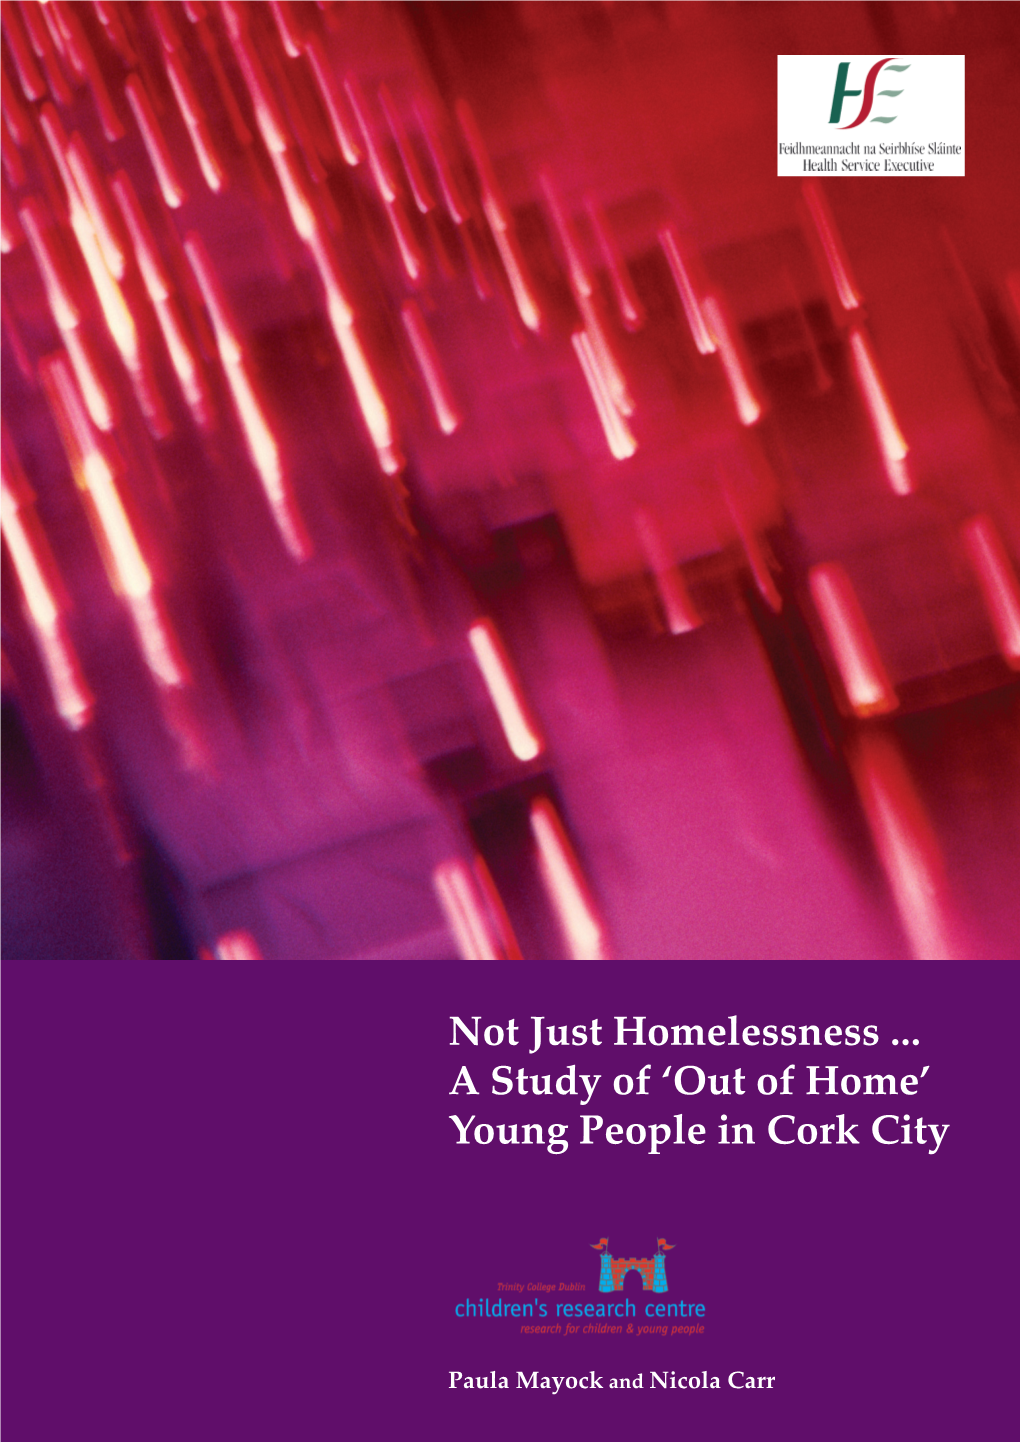 Not Just Homelessness ... a Study of 'Out of Home' Young People in Cork